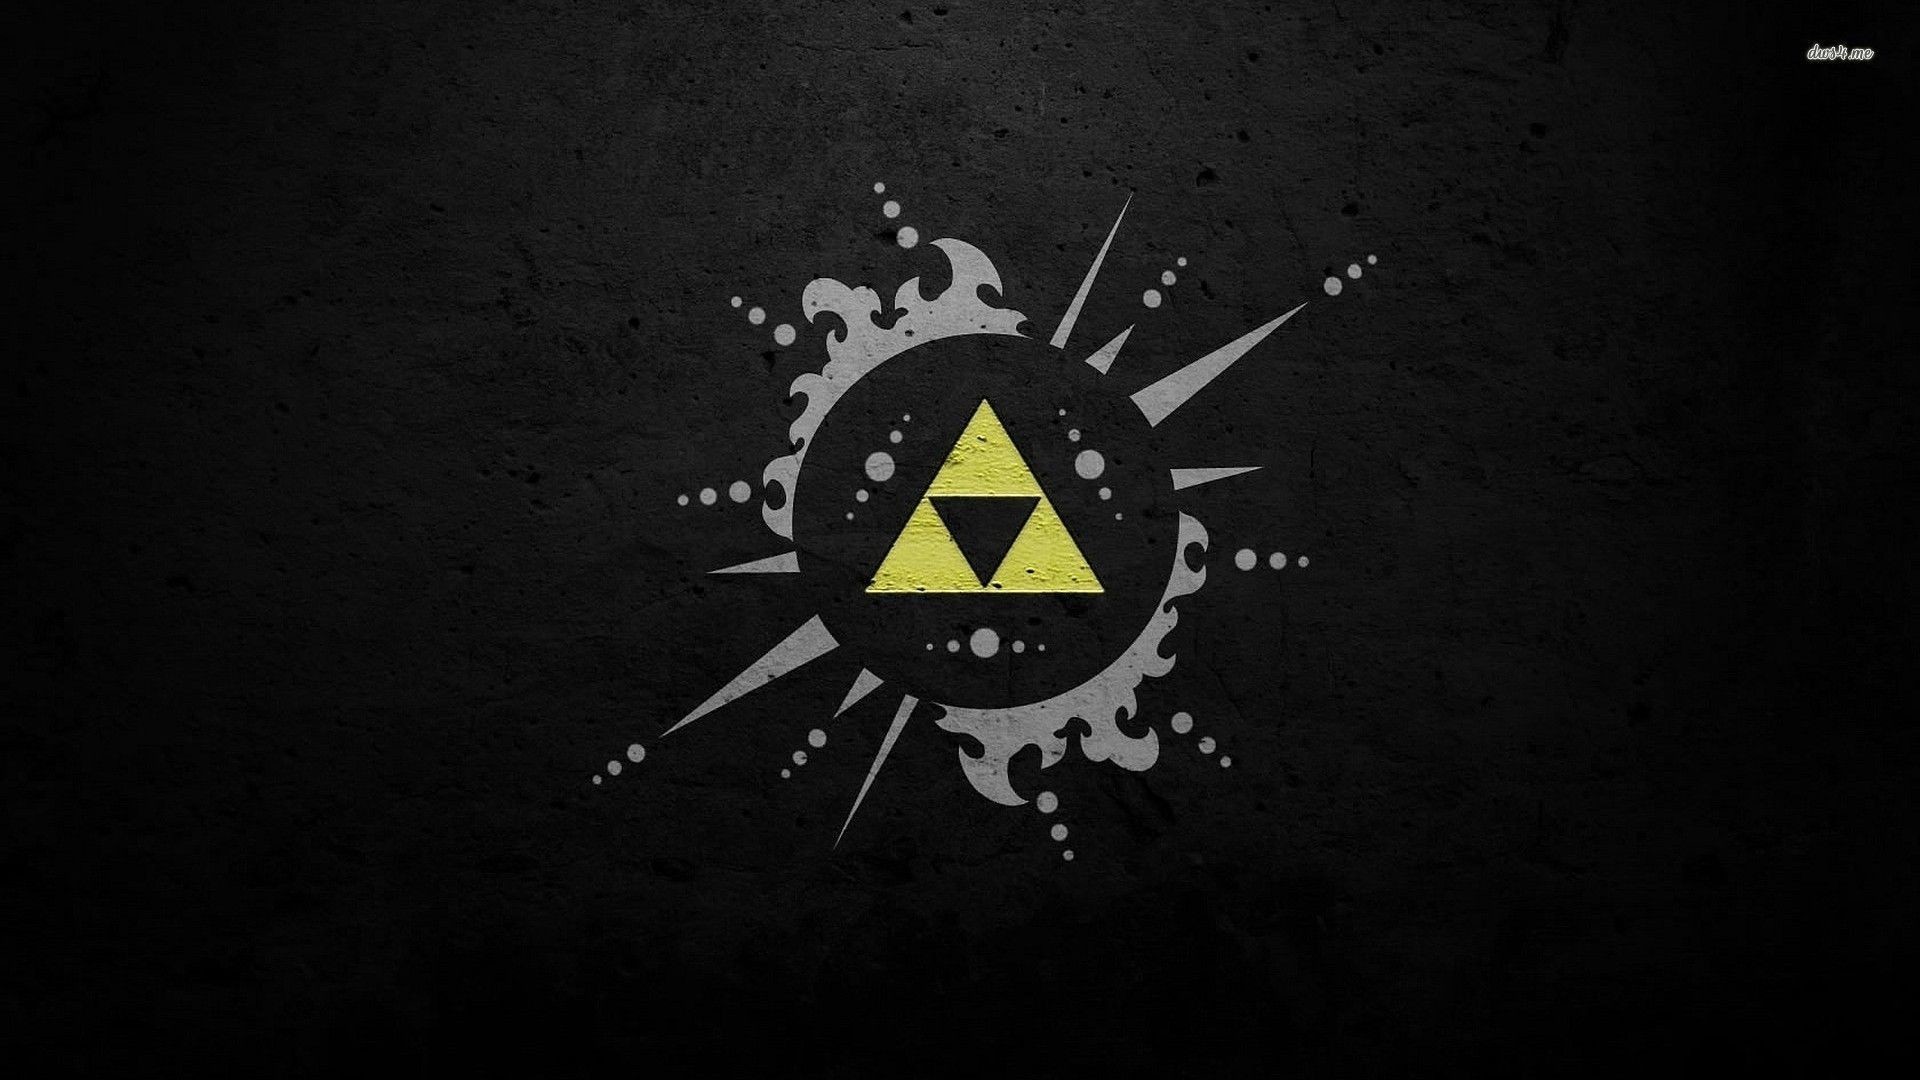 1920x1080  ... zelda backgrounds wallpapers browse; awesome legend of .